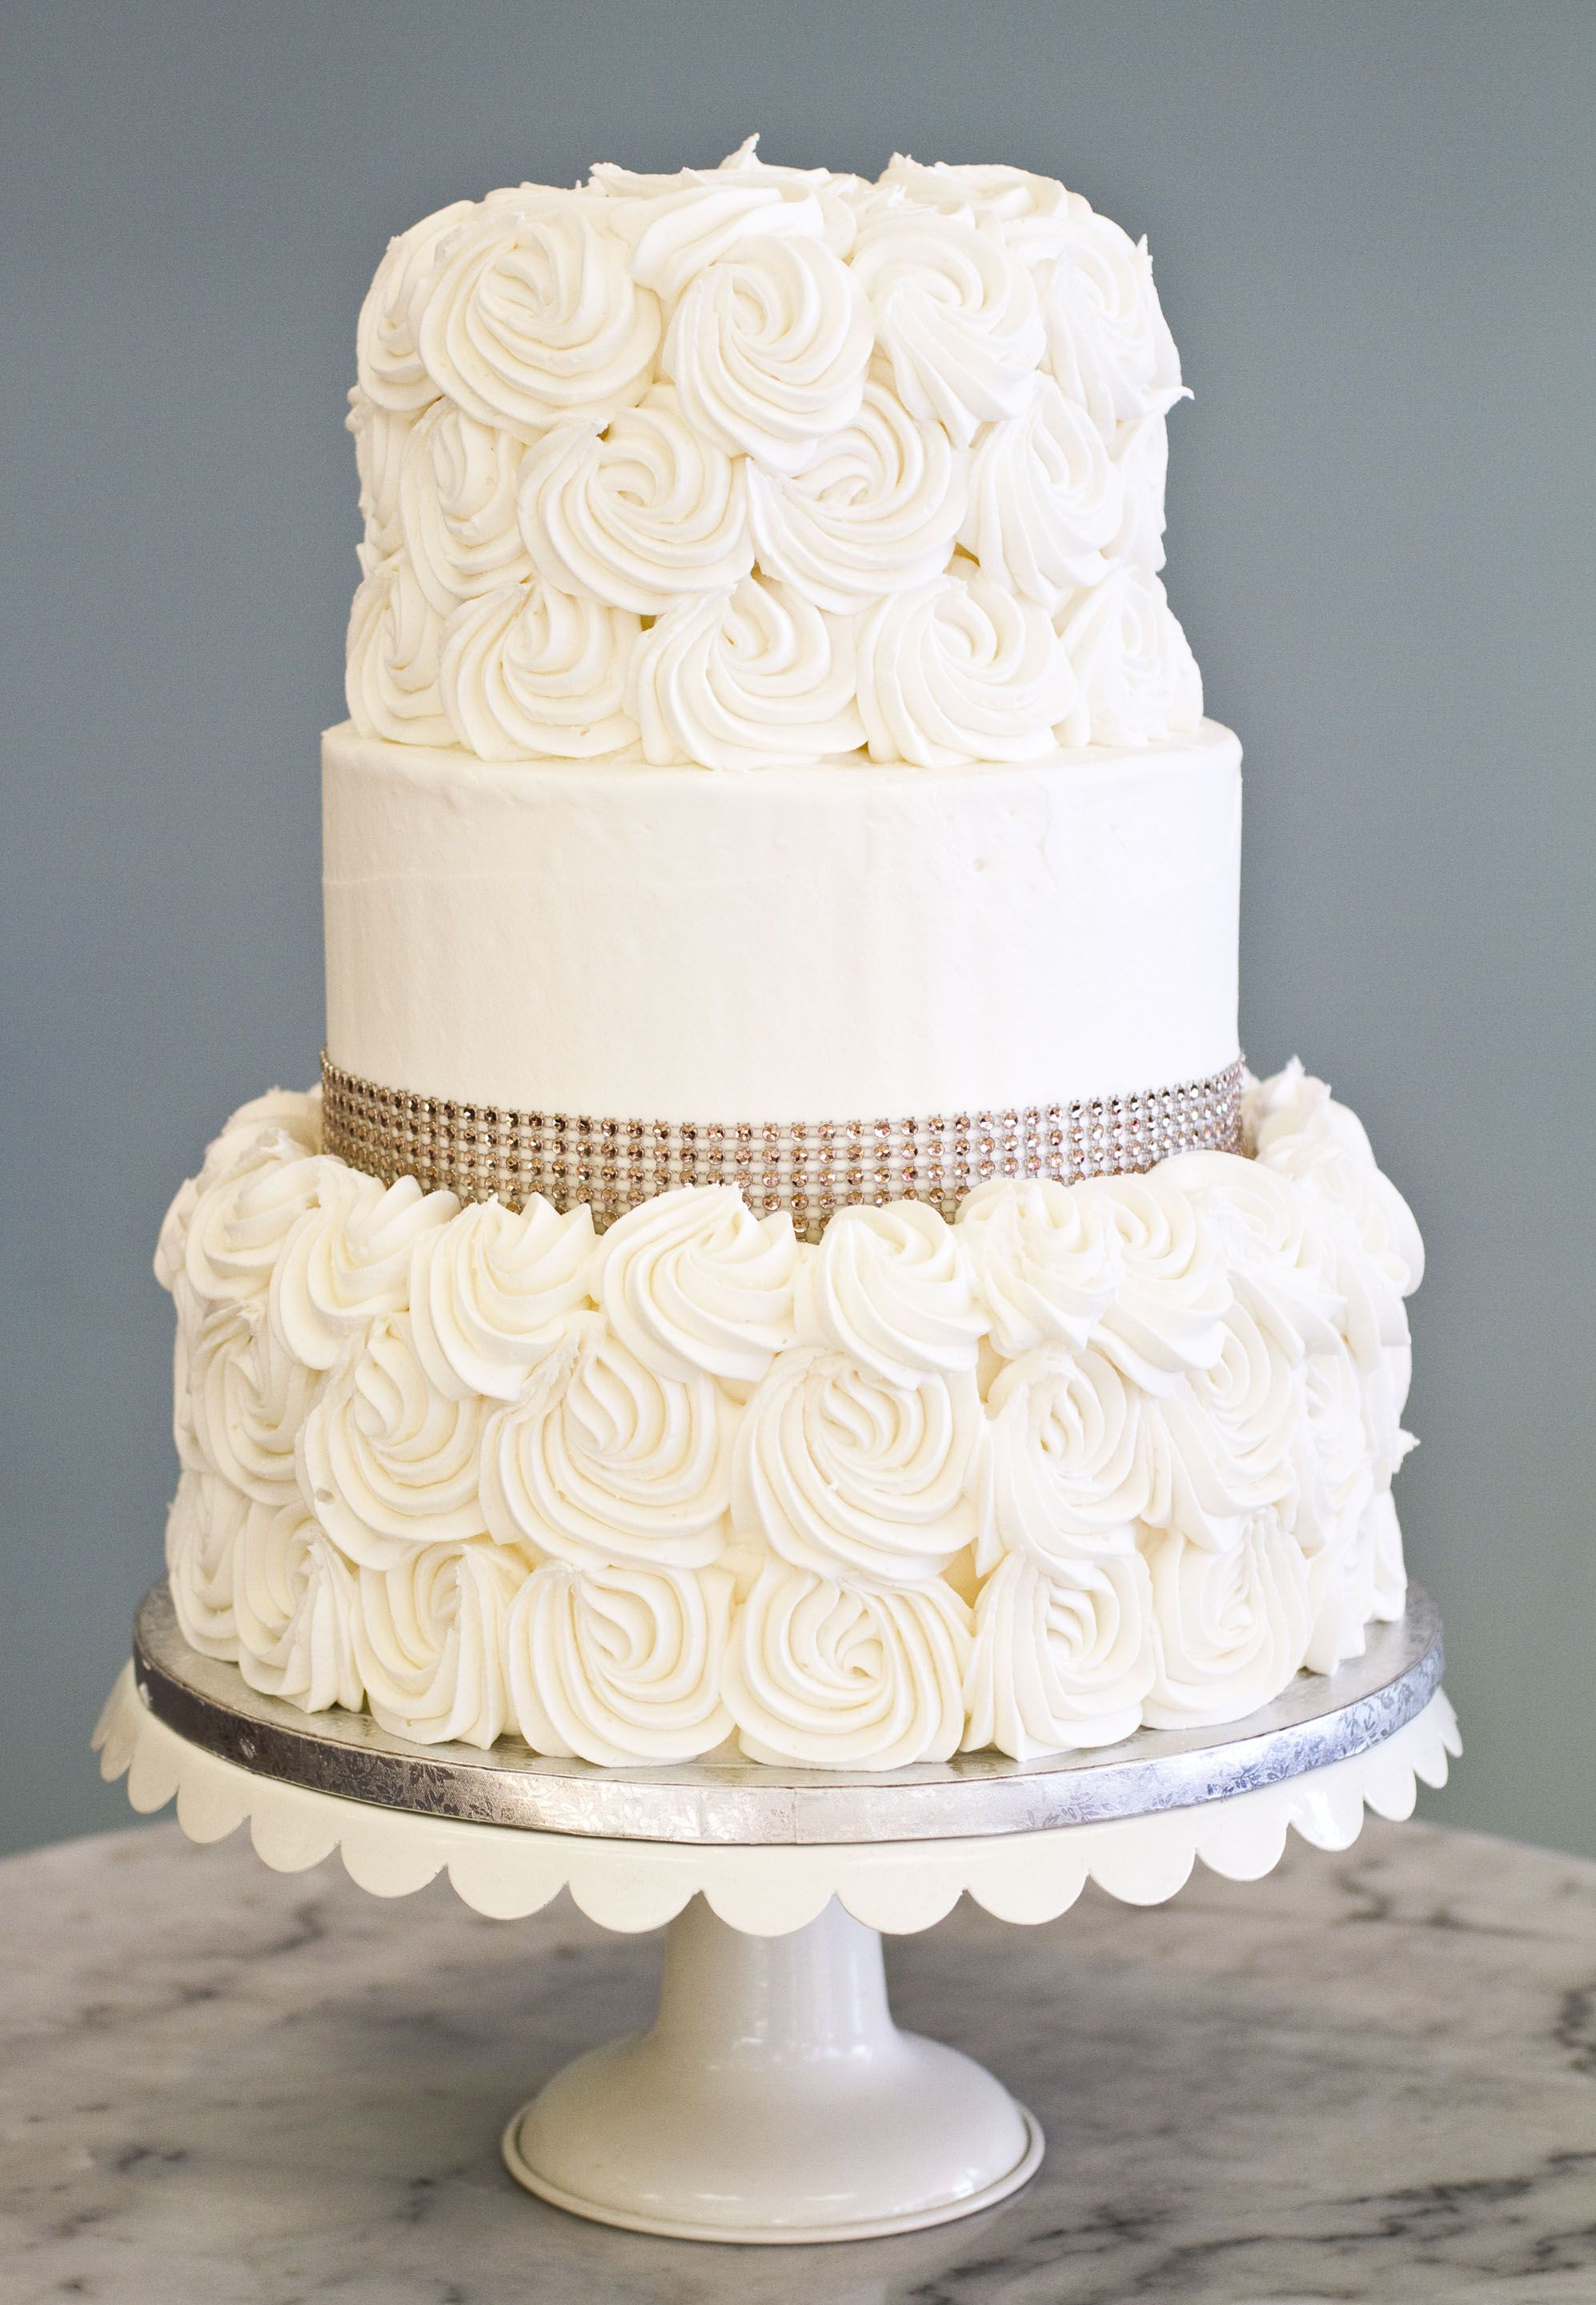 Simple And Elegant Wedding Cakes
 A simple elegant wedding cake with rosettes and